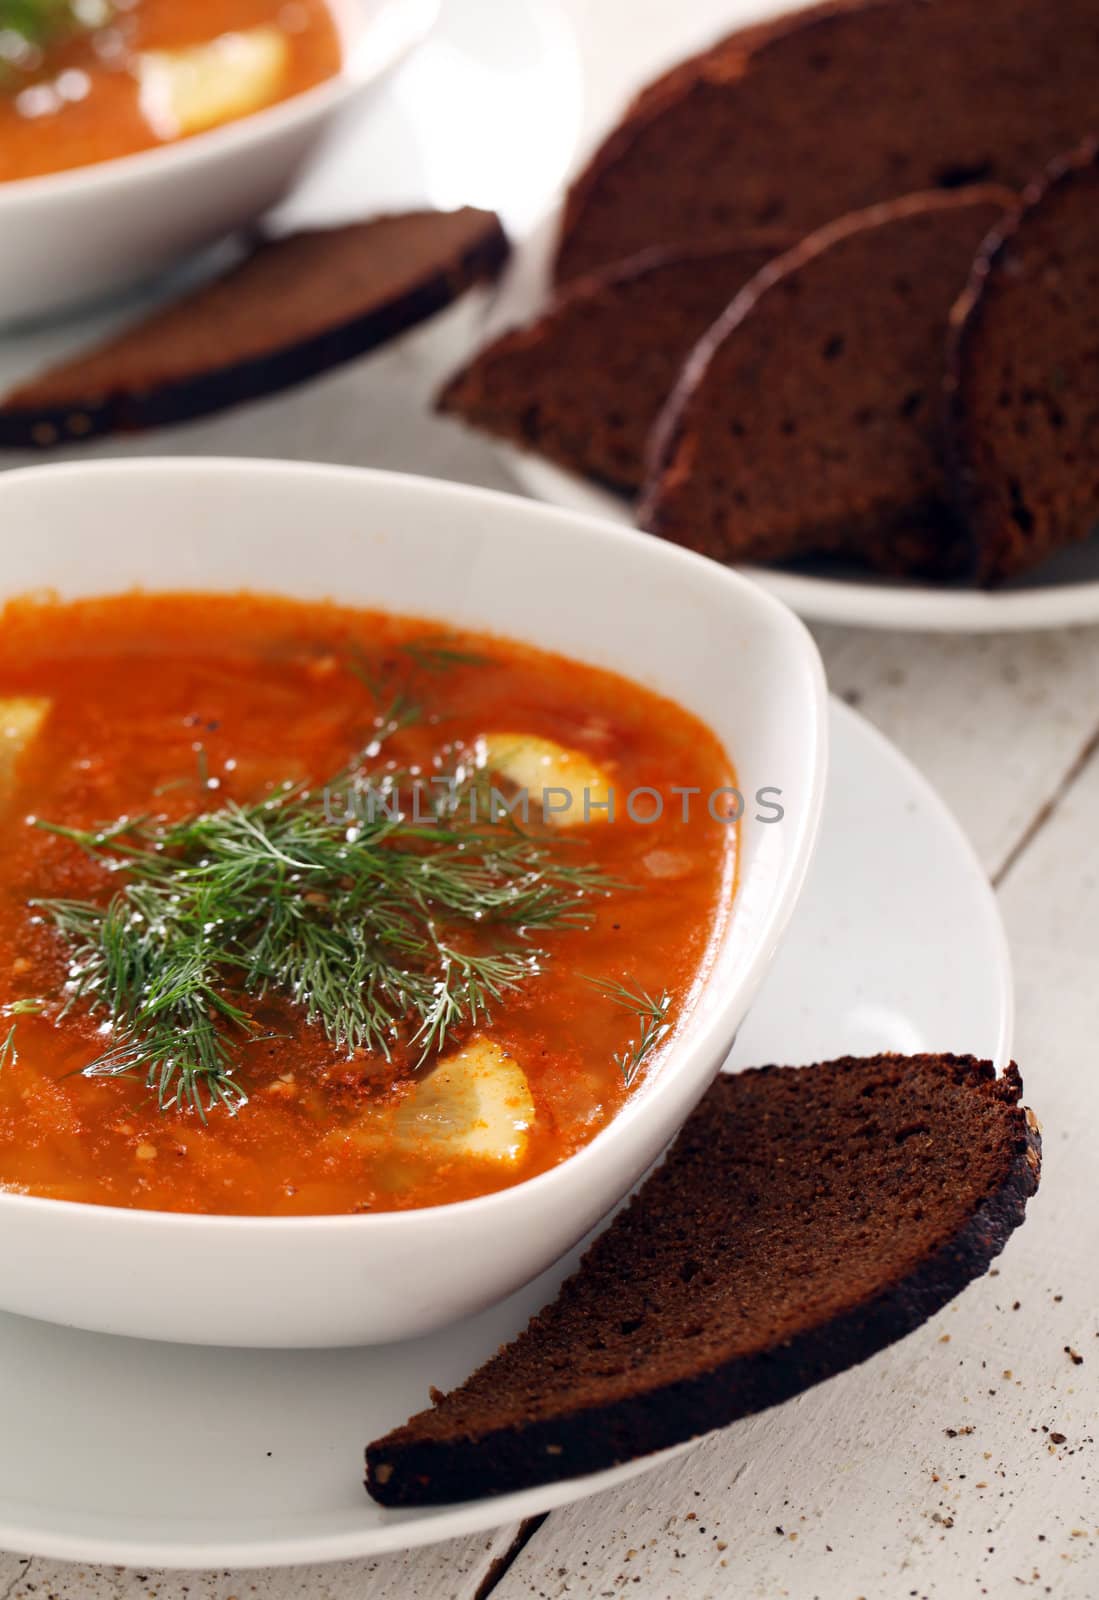 Image of bowl of hot red soup and black bread on white wooden table